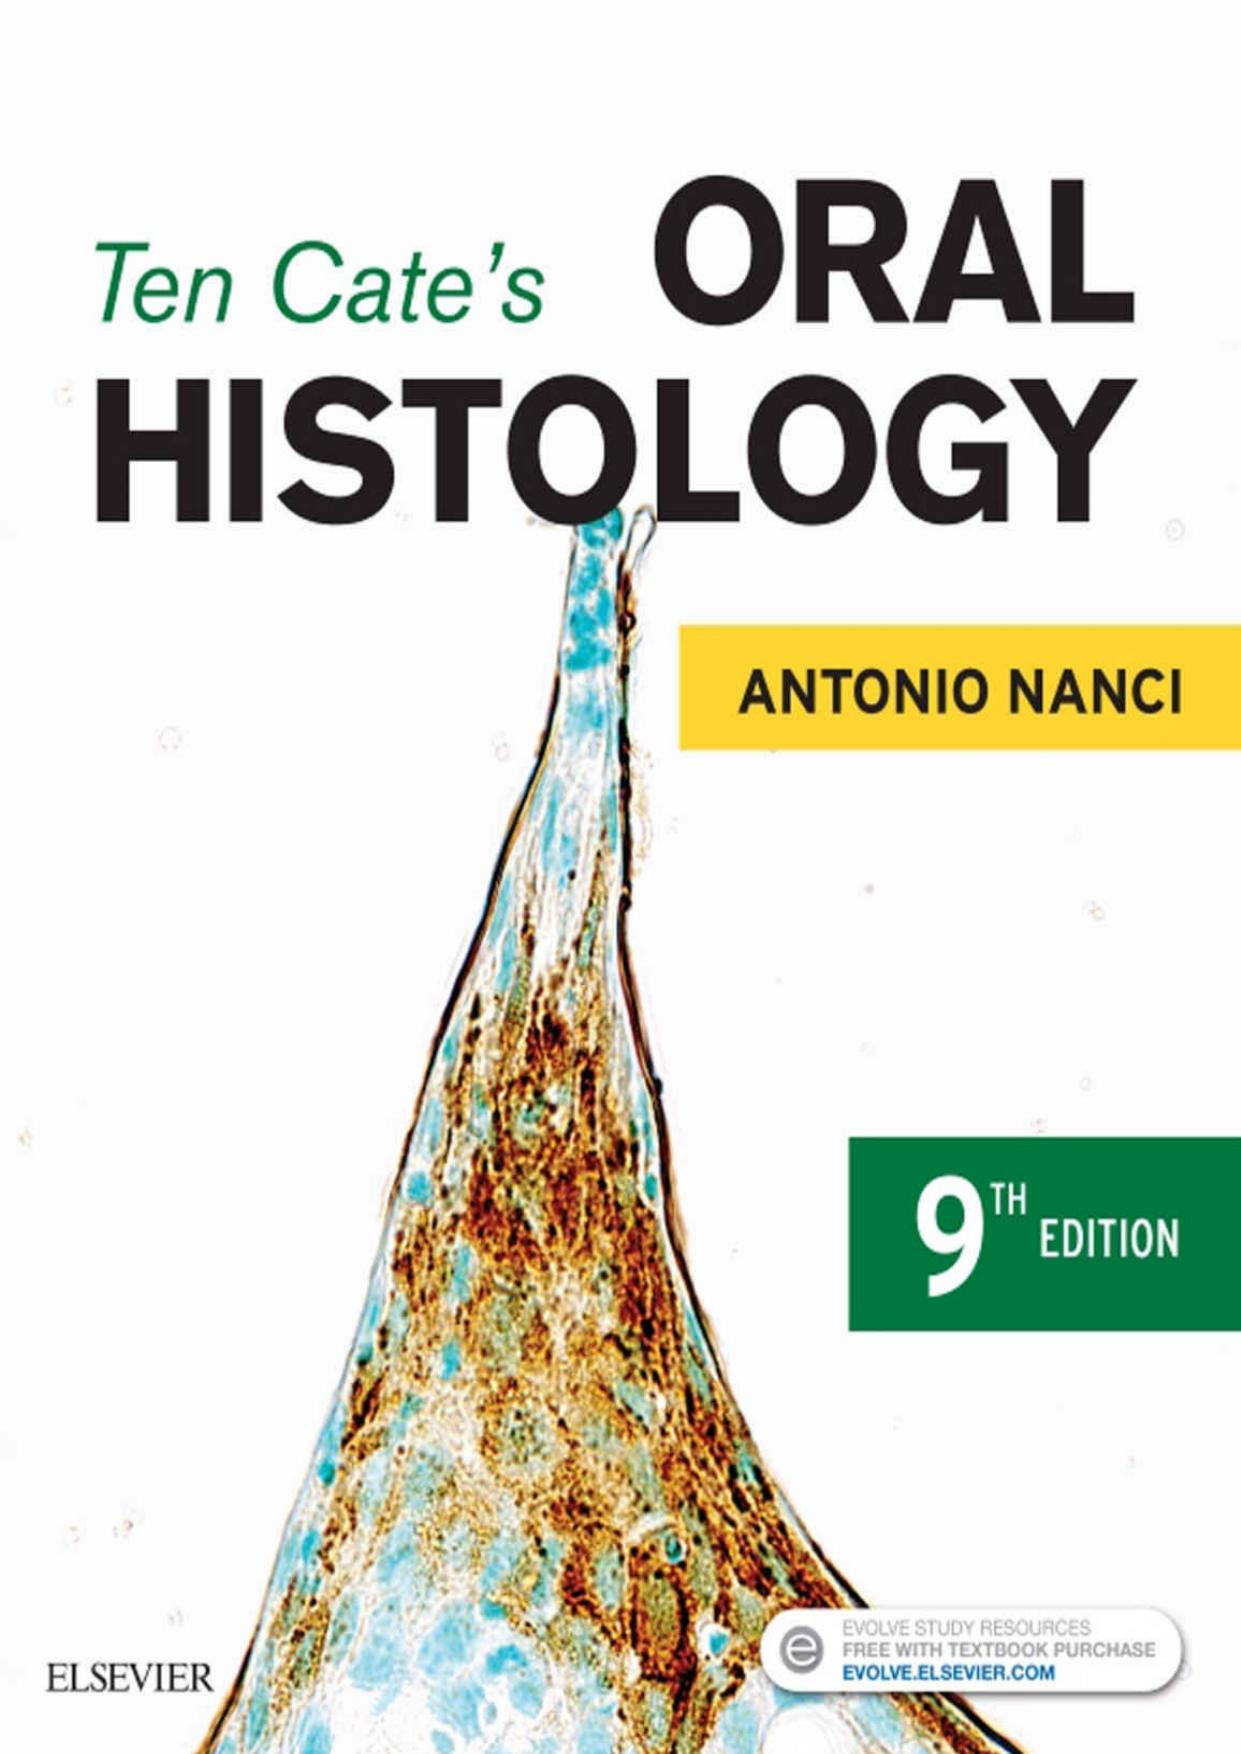 Ten Cate's Oral Histology - E-Book: Development, Structure, and Function